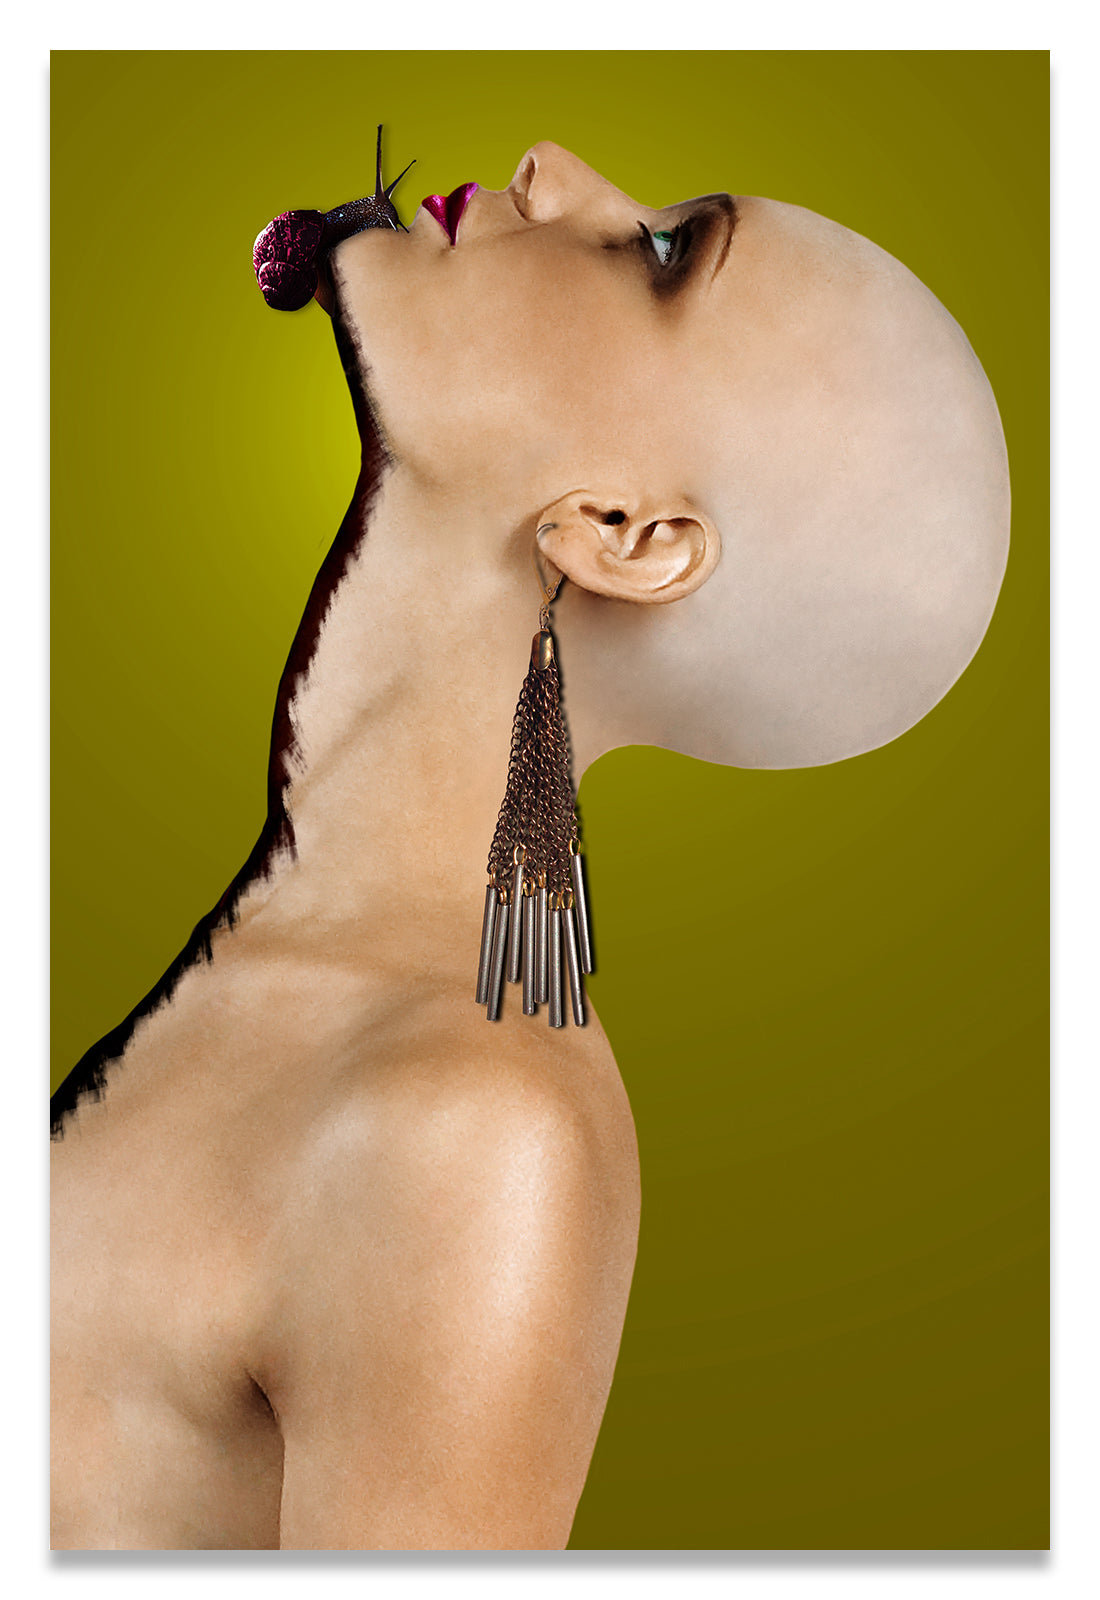 Colorful Chartreuse Surreal Portrait of a Bald Woman with a Snail Crawling up her Neck.